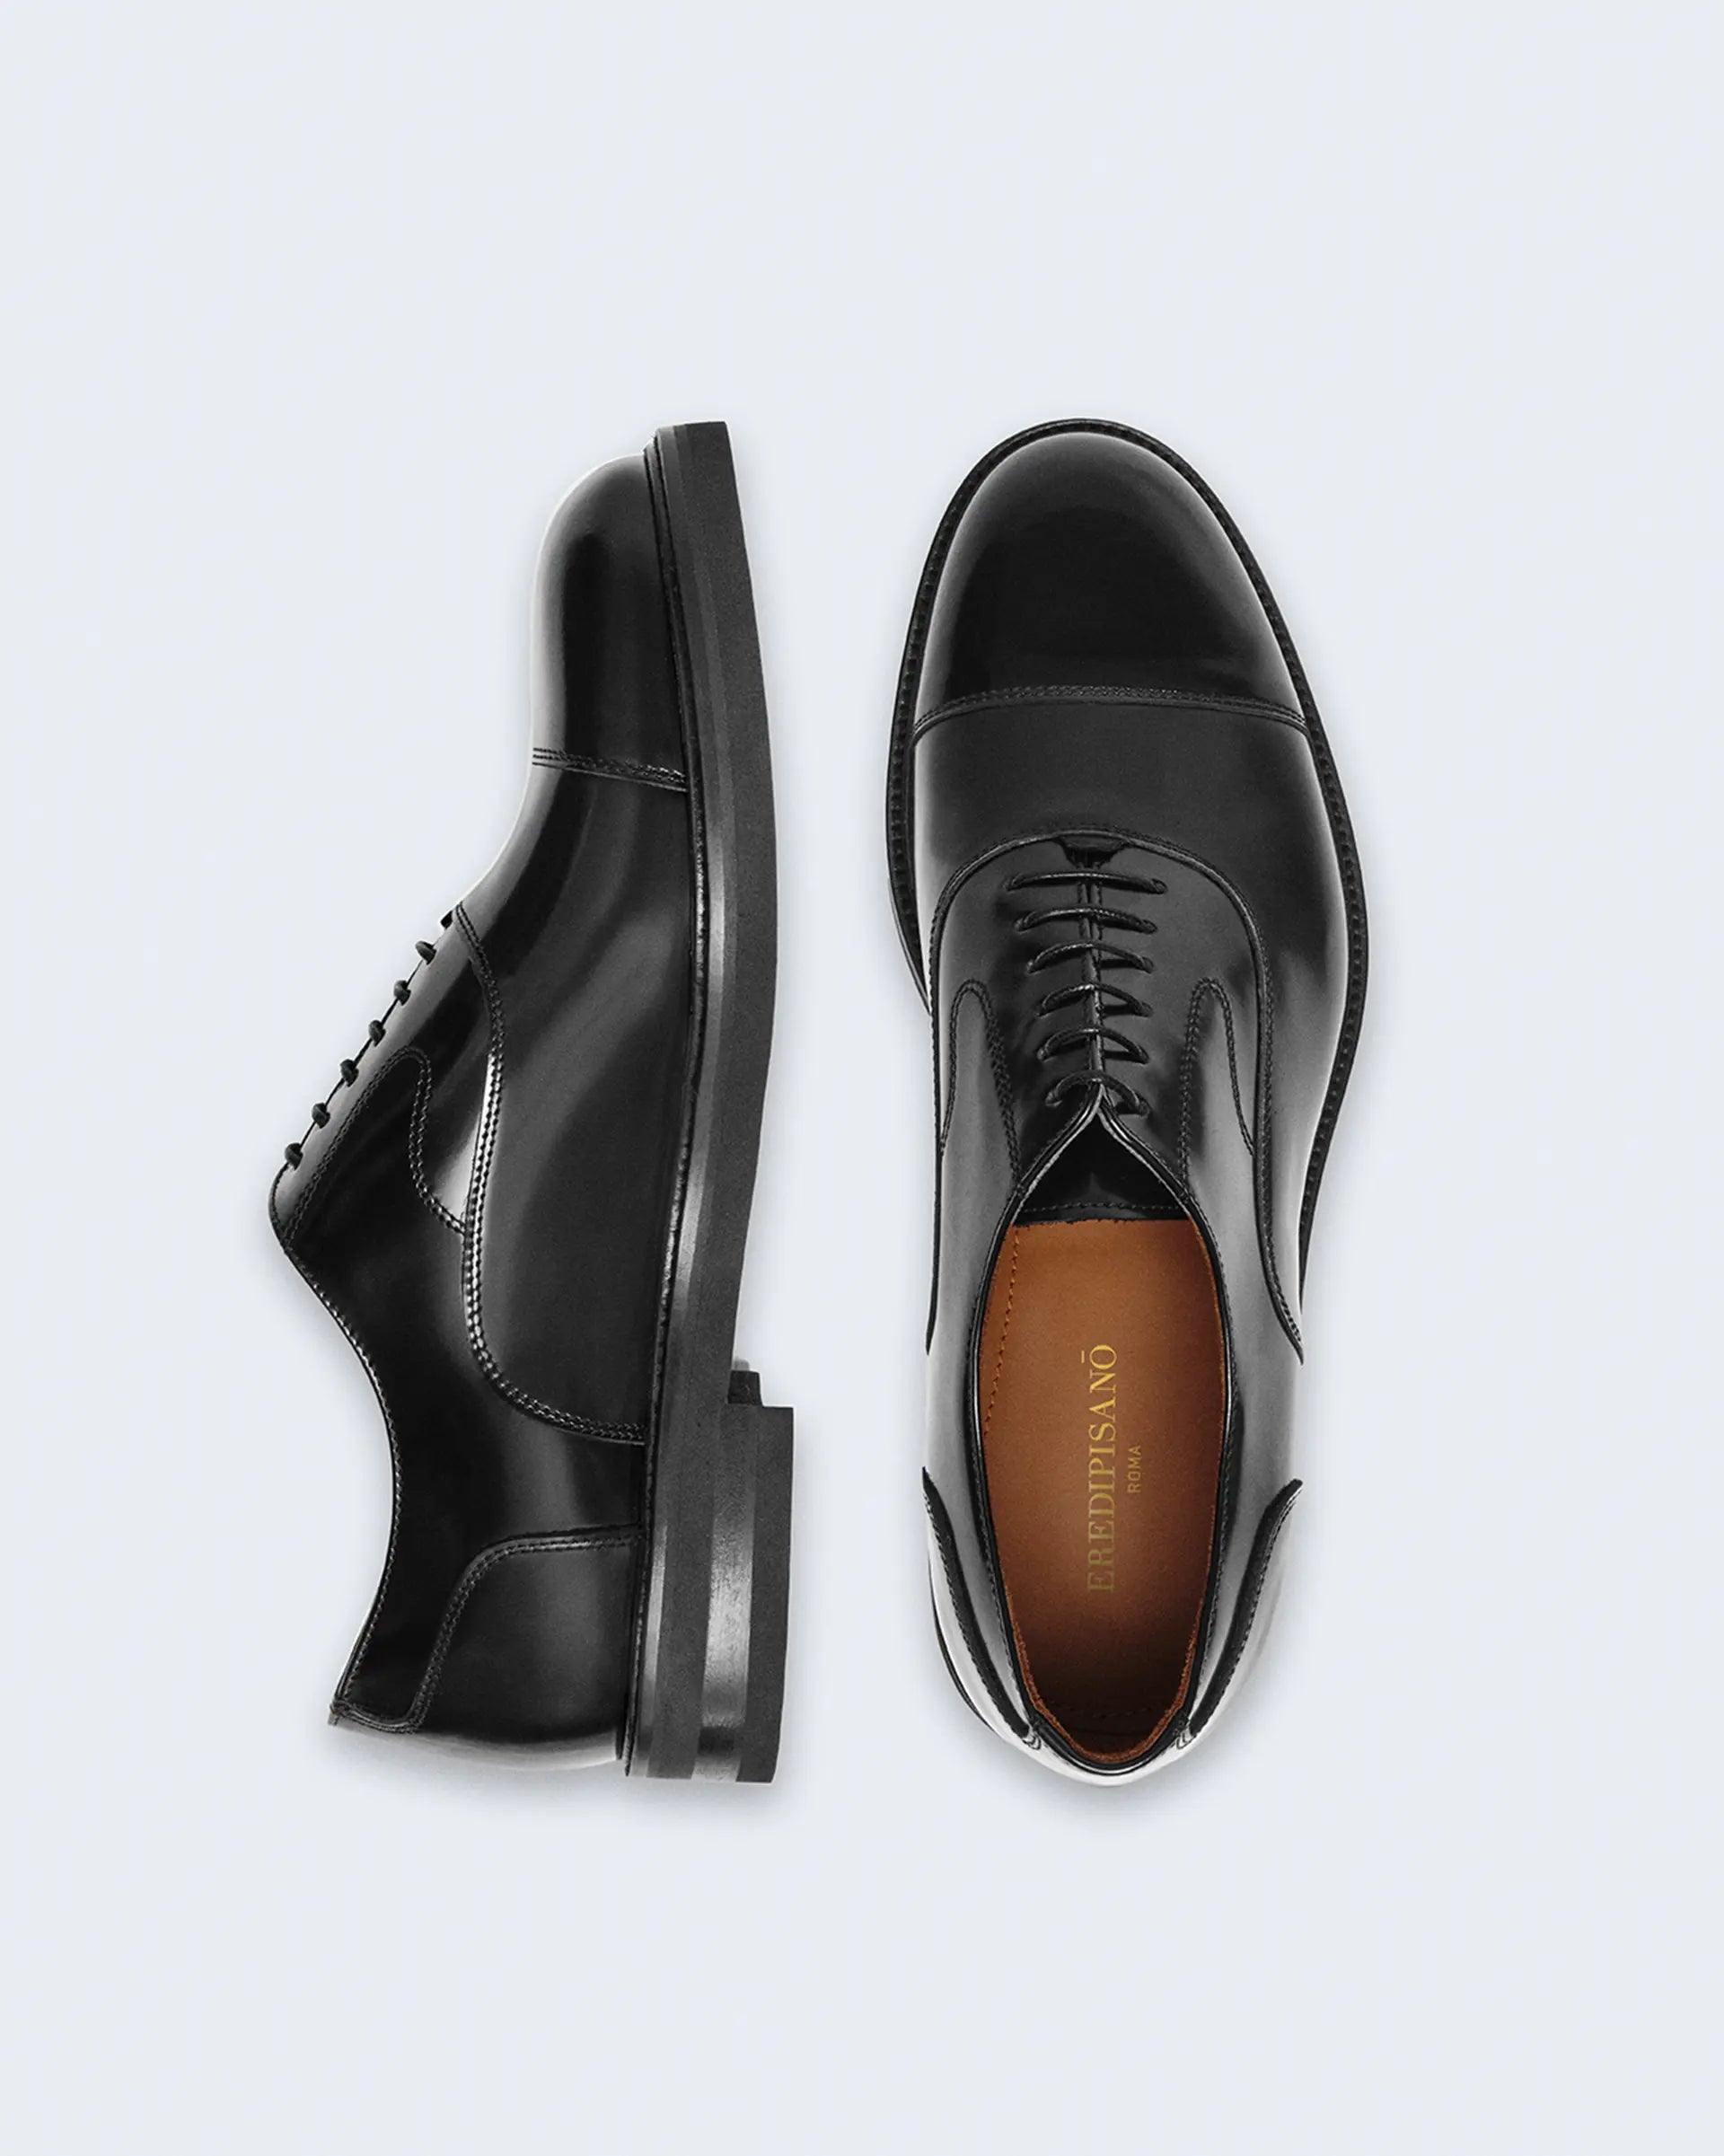 Oxford lace-up in black brushed calfskin